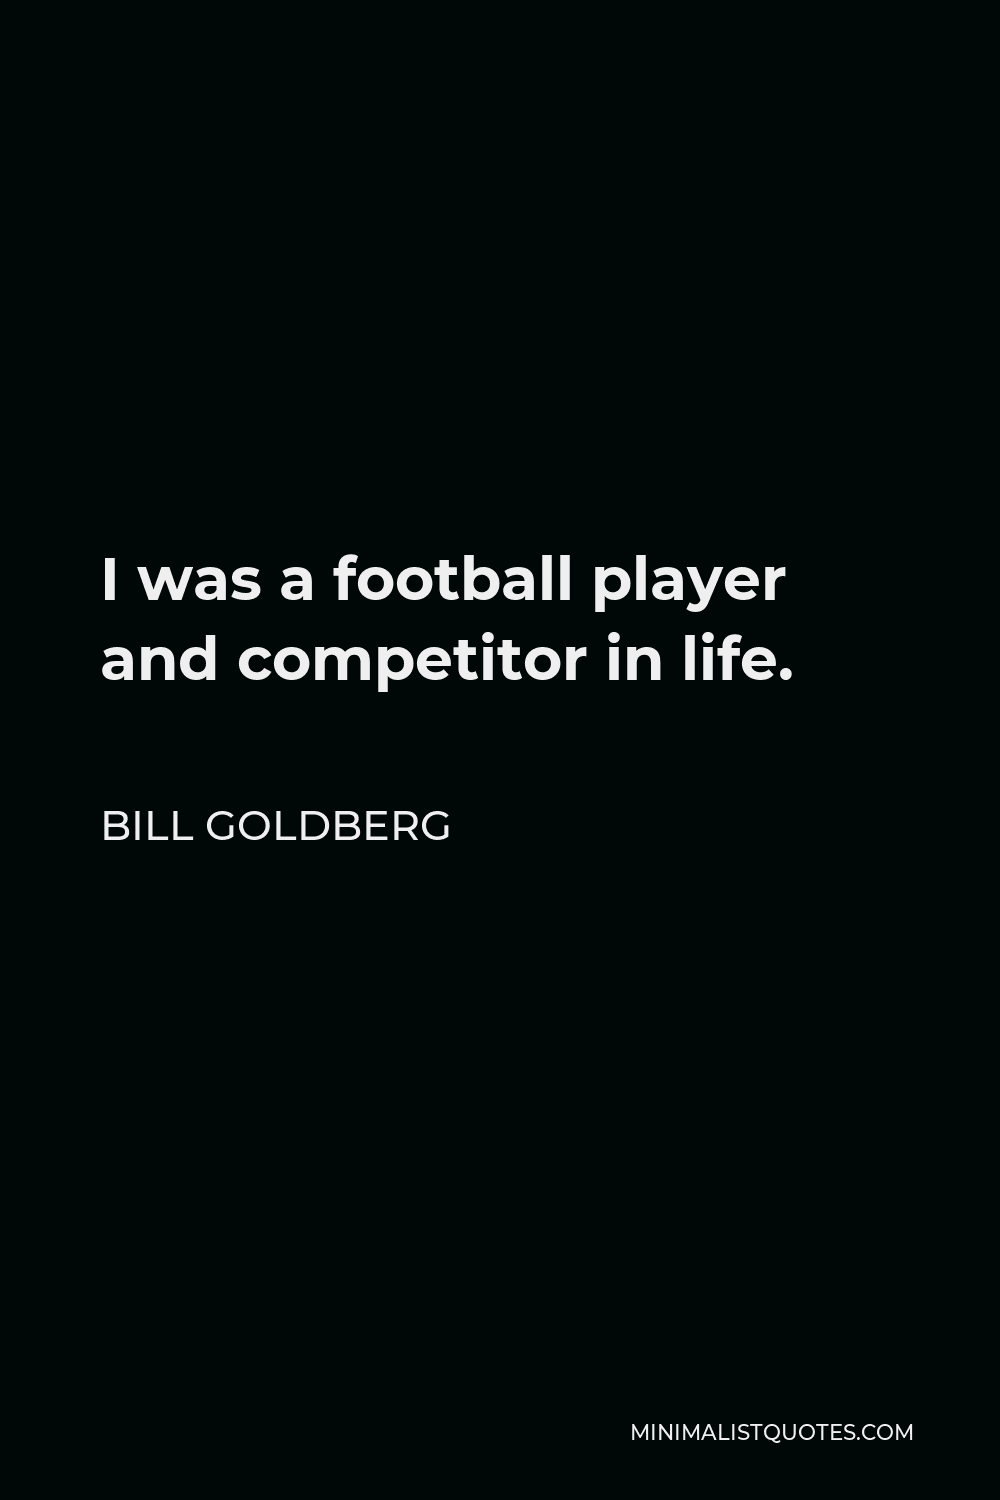 Bill Goldberg Quote - I was a football player and competitor in life.